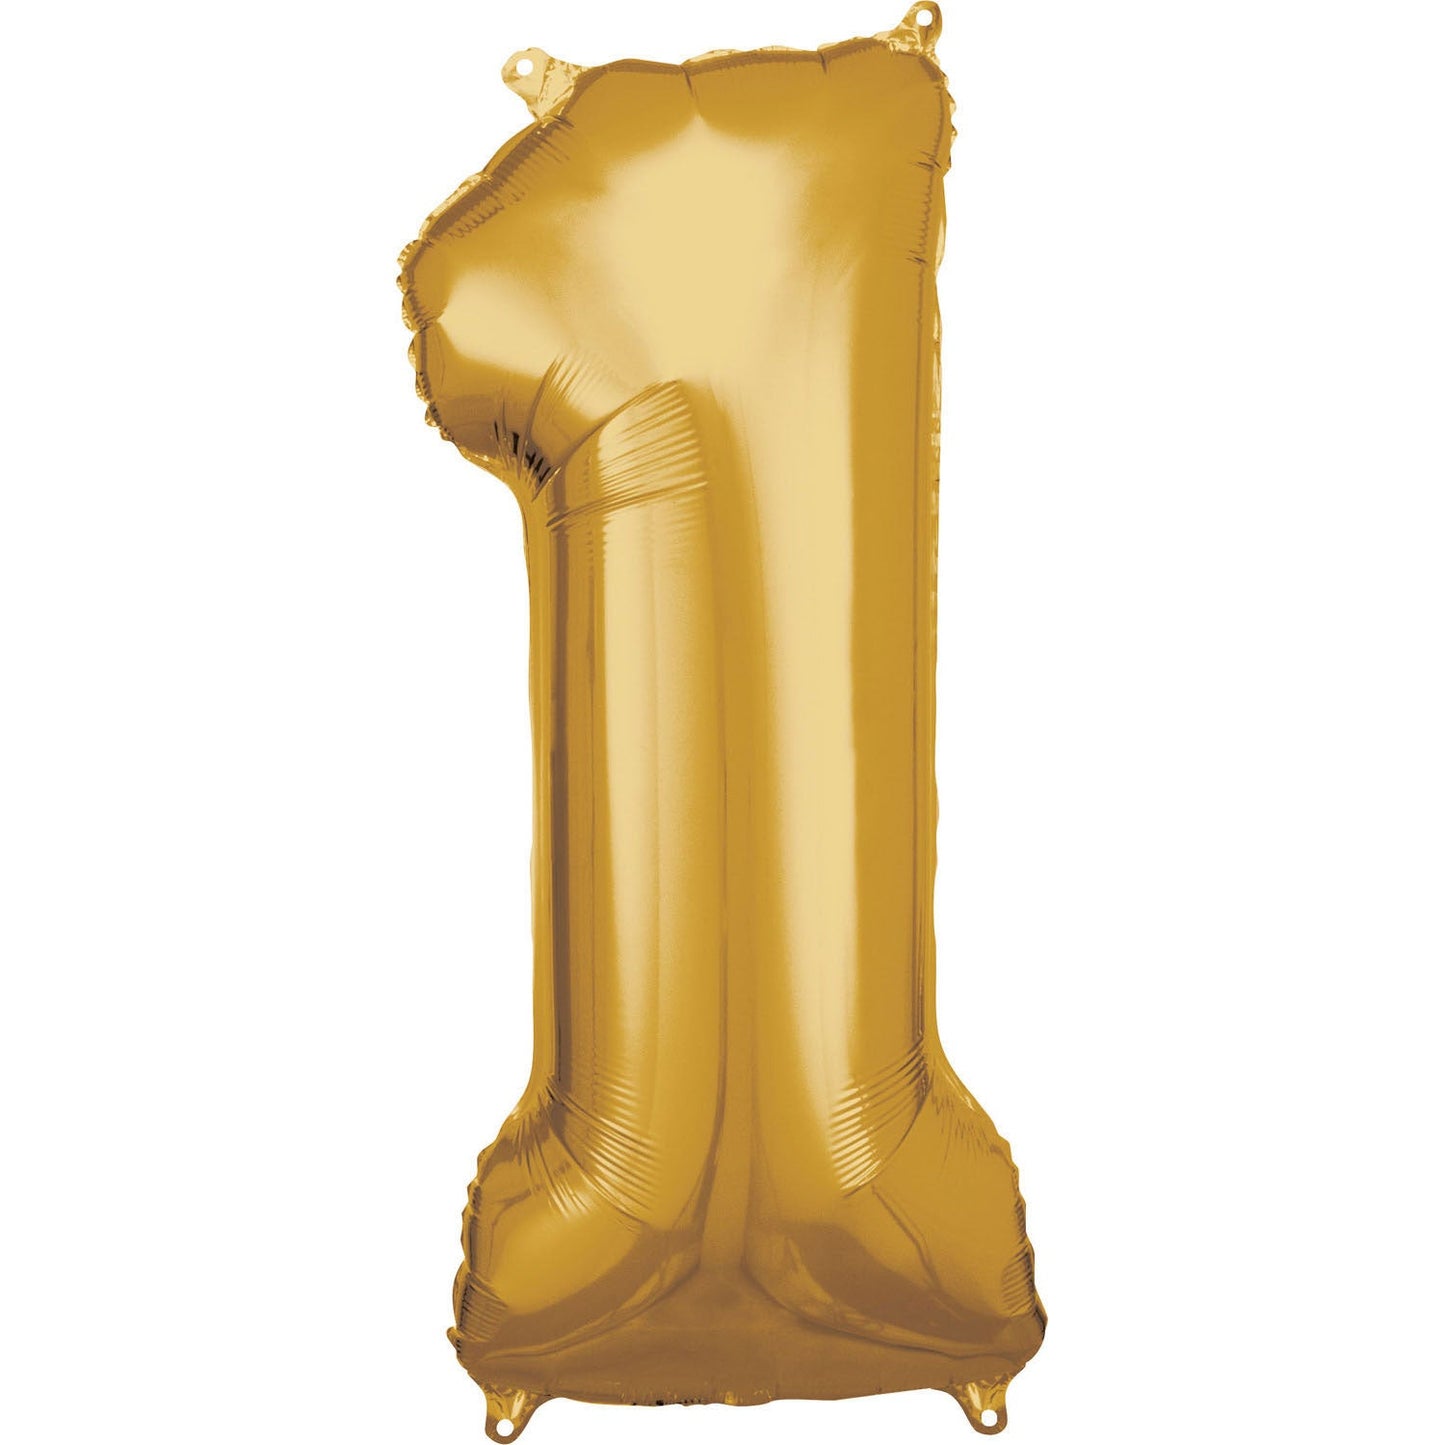 Gold Supershape Number 1 Foil Balloon 86cm (33in) height by 33cm (13in) width Balloon is sold uninflated. Can be inflated with air or helium.